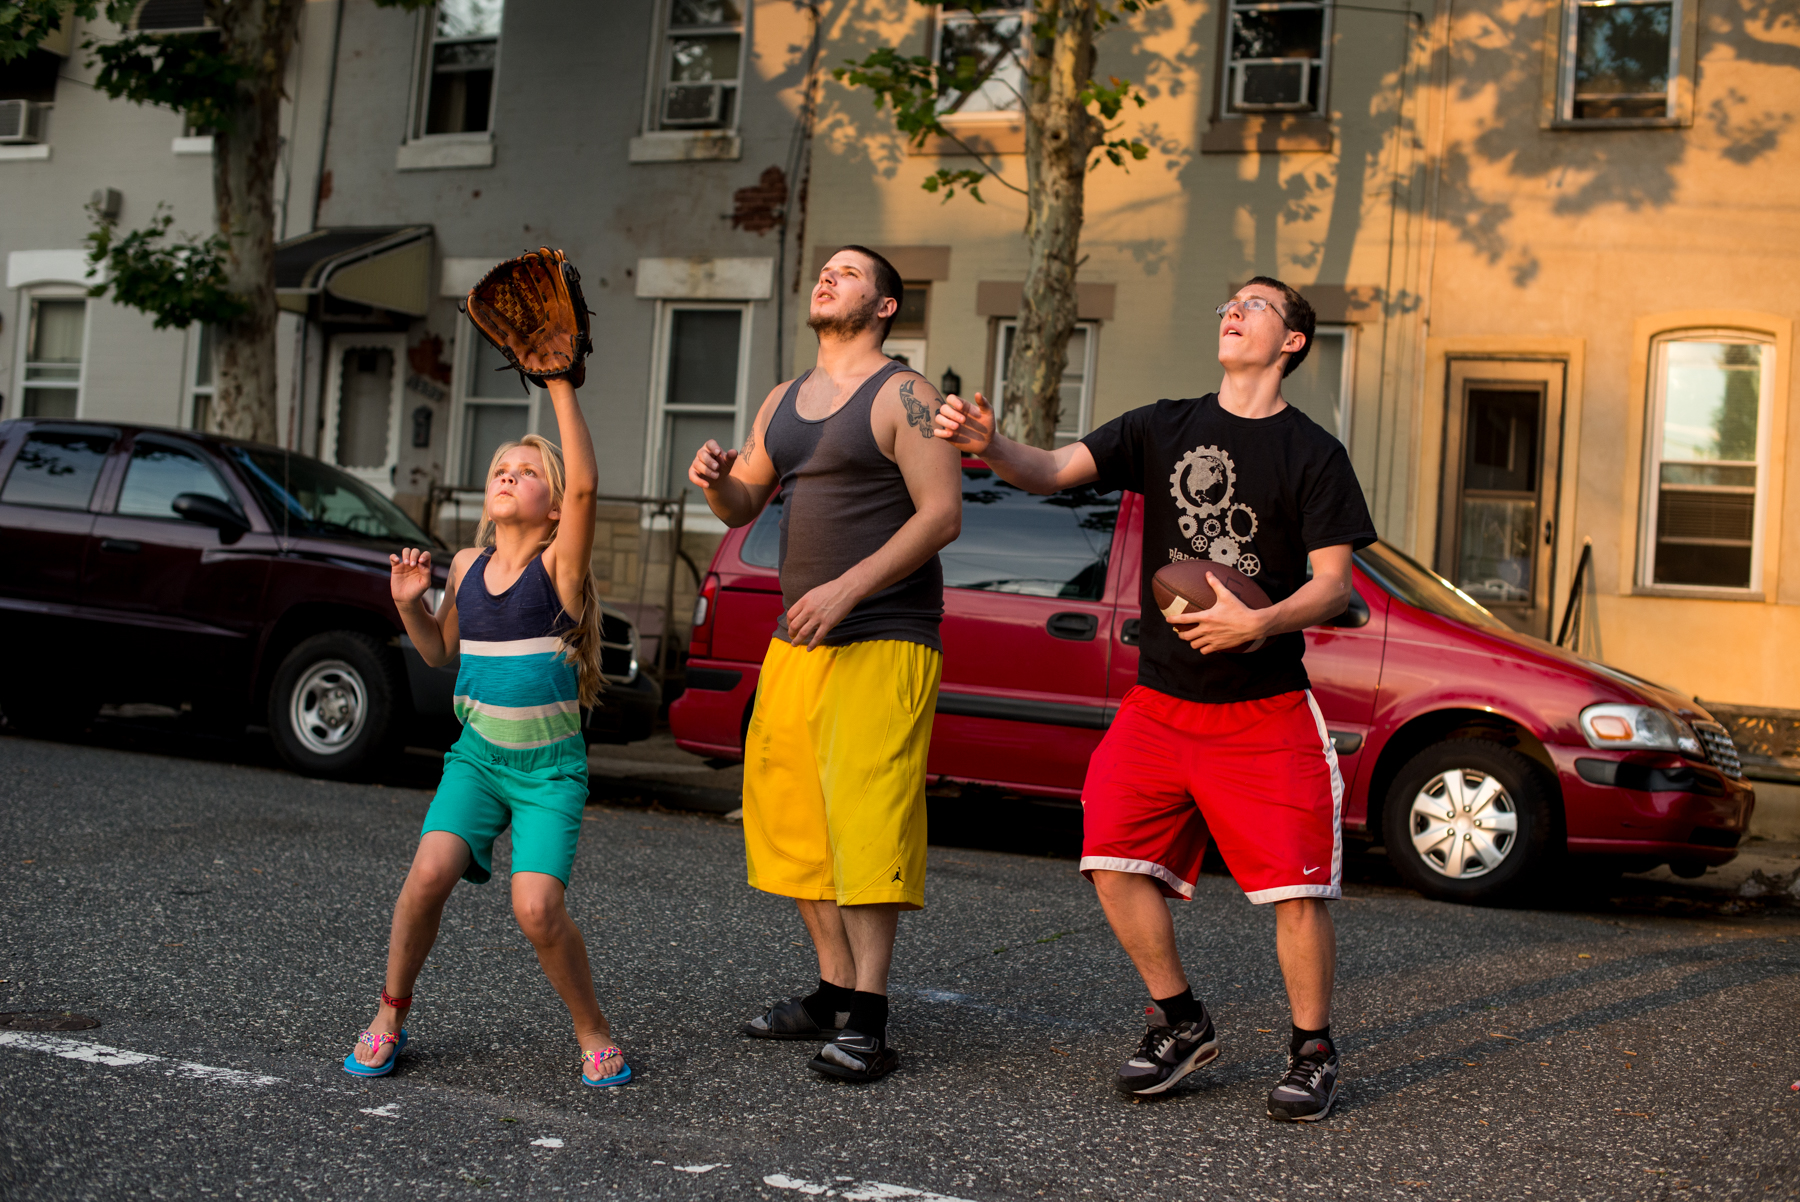 Philadelphia, PA - July 1, 2015 - Older guys playing with younger kids in the neighborhood. Forgotten Bottom.